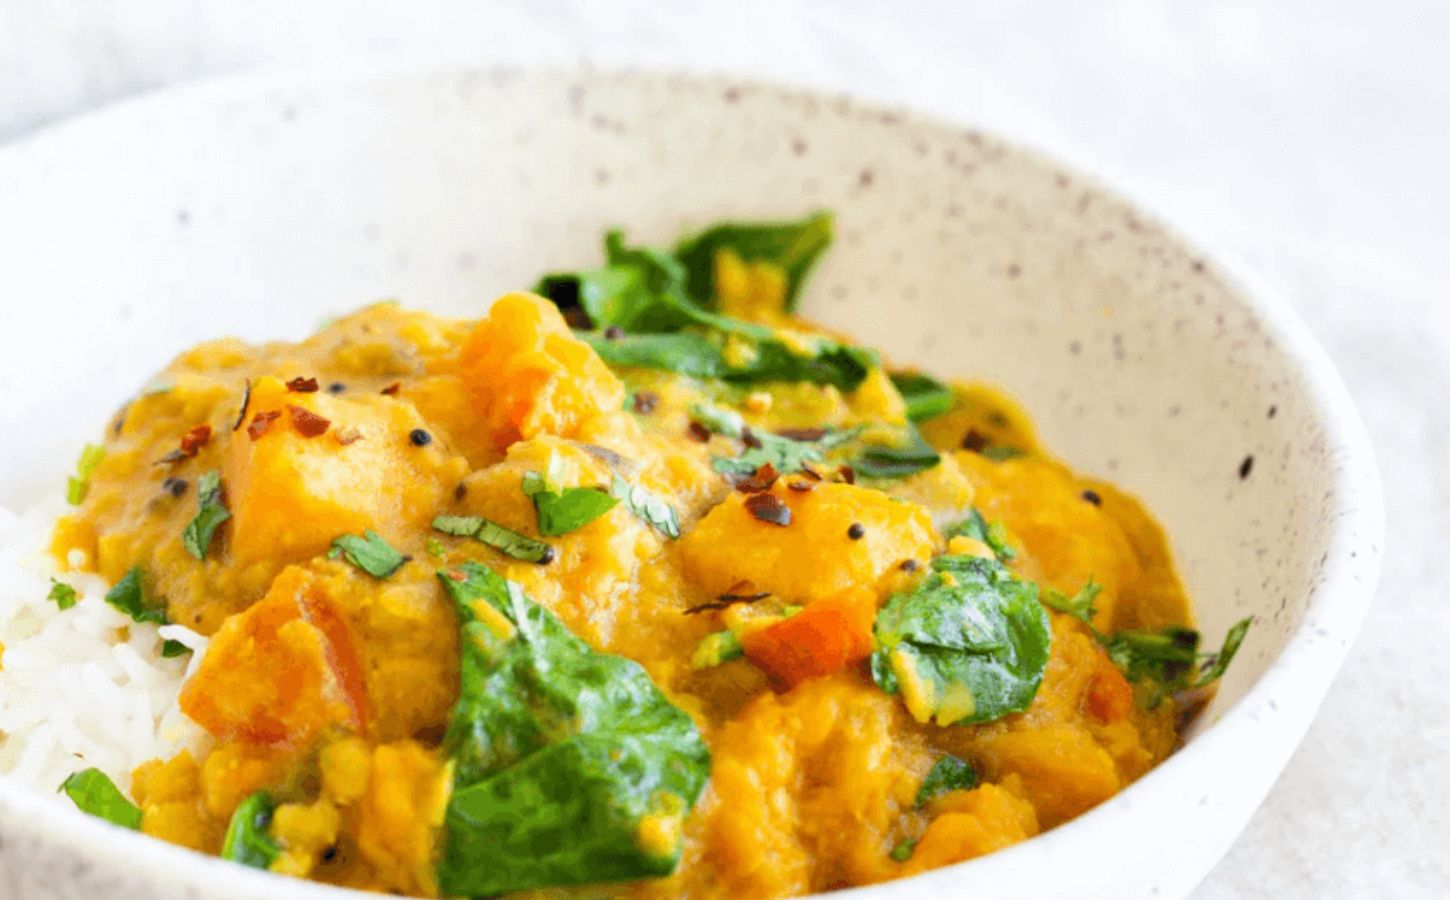 A vegan red lentil and butternut squash Indian curry, cooked in an instant pot from a plant-based recipe